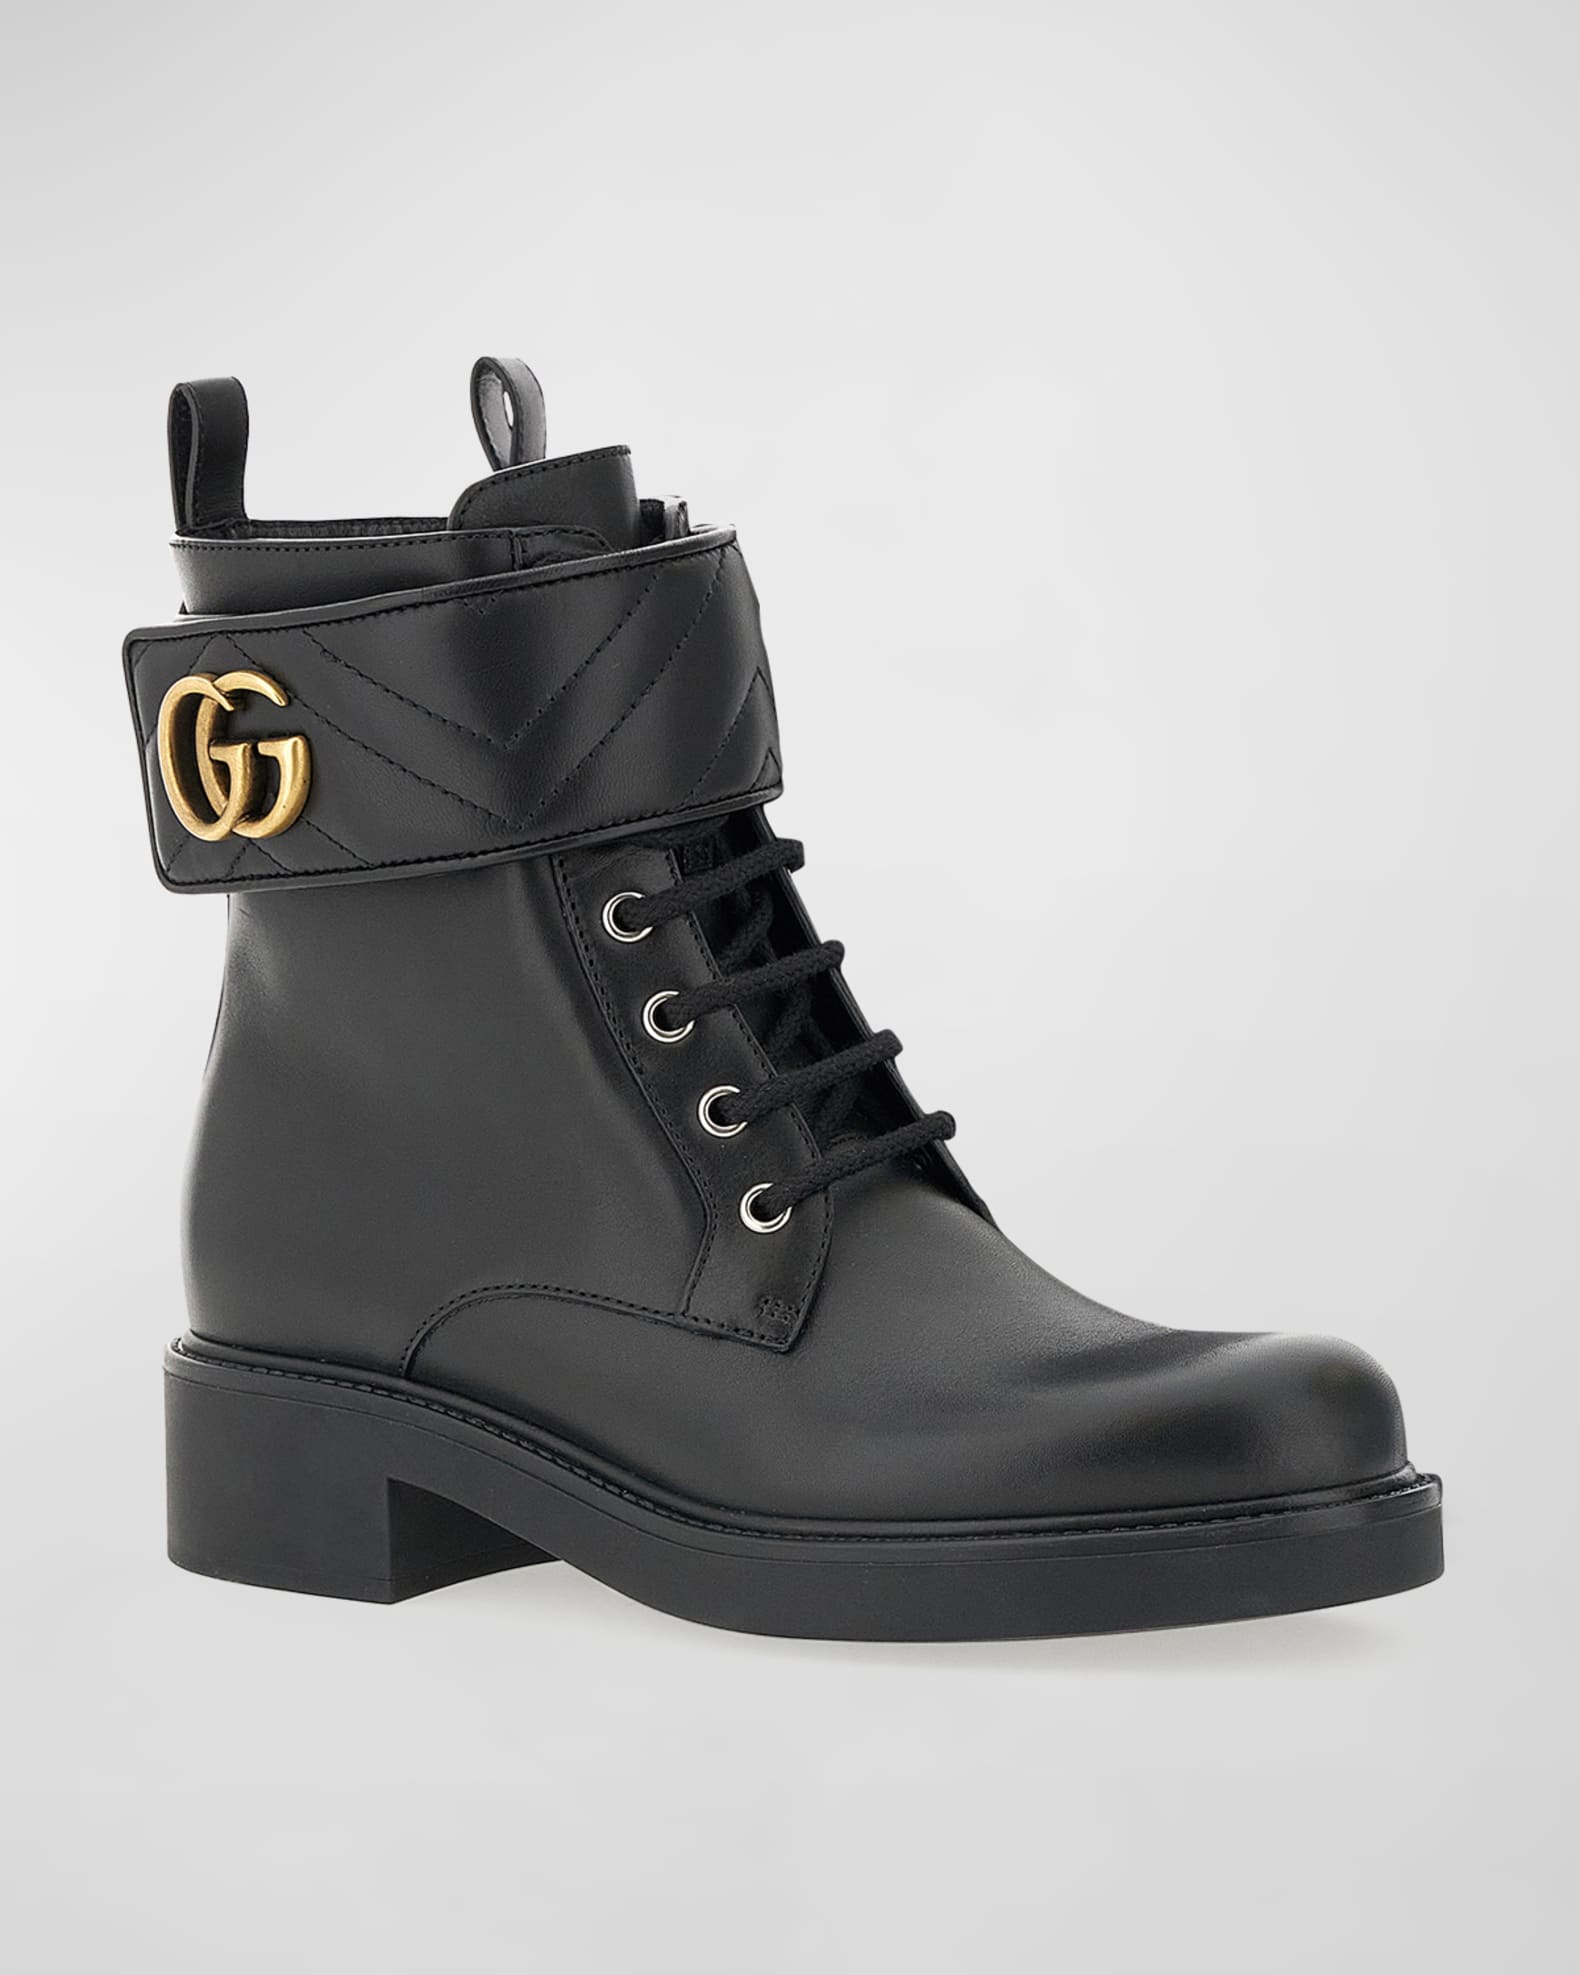 Gucci Marmont GG Leather Lace-Up Booties | Neiman Marcus